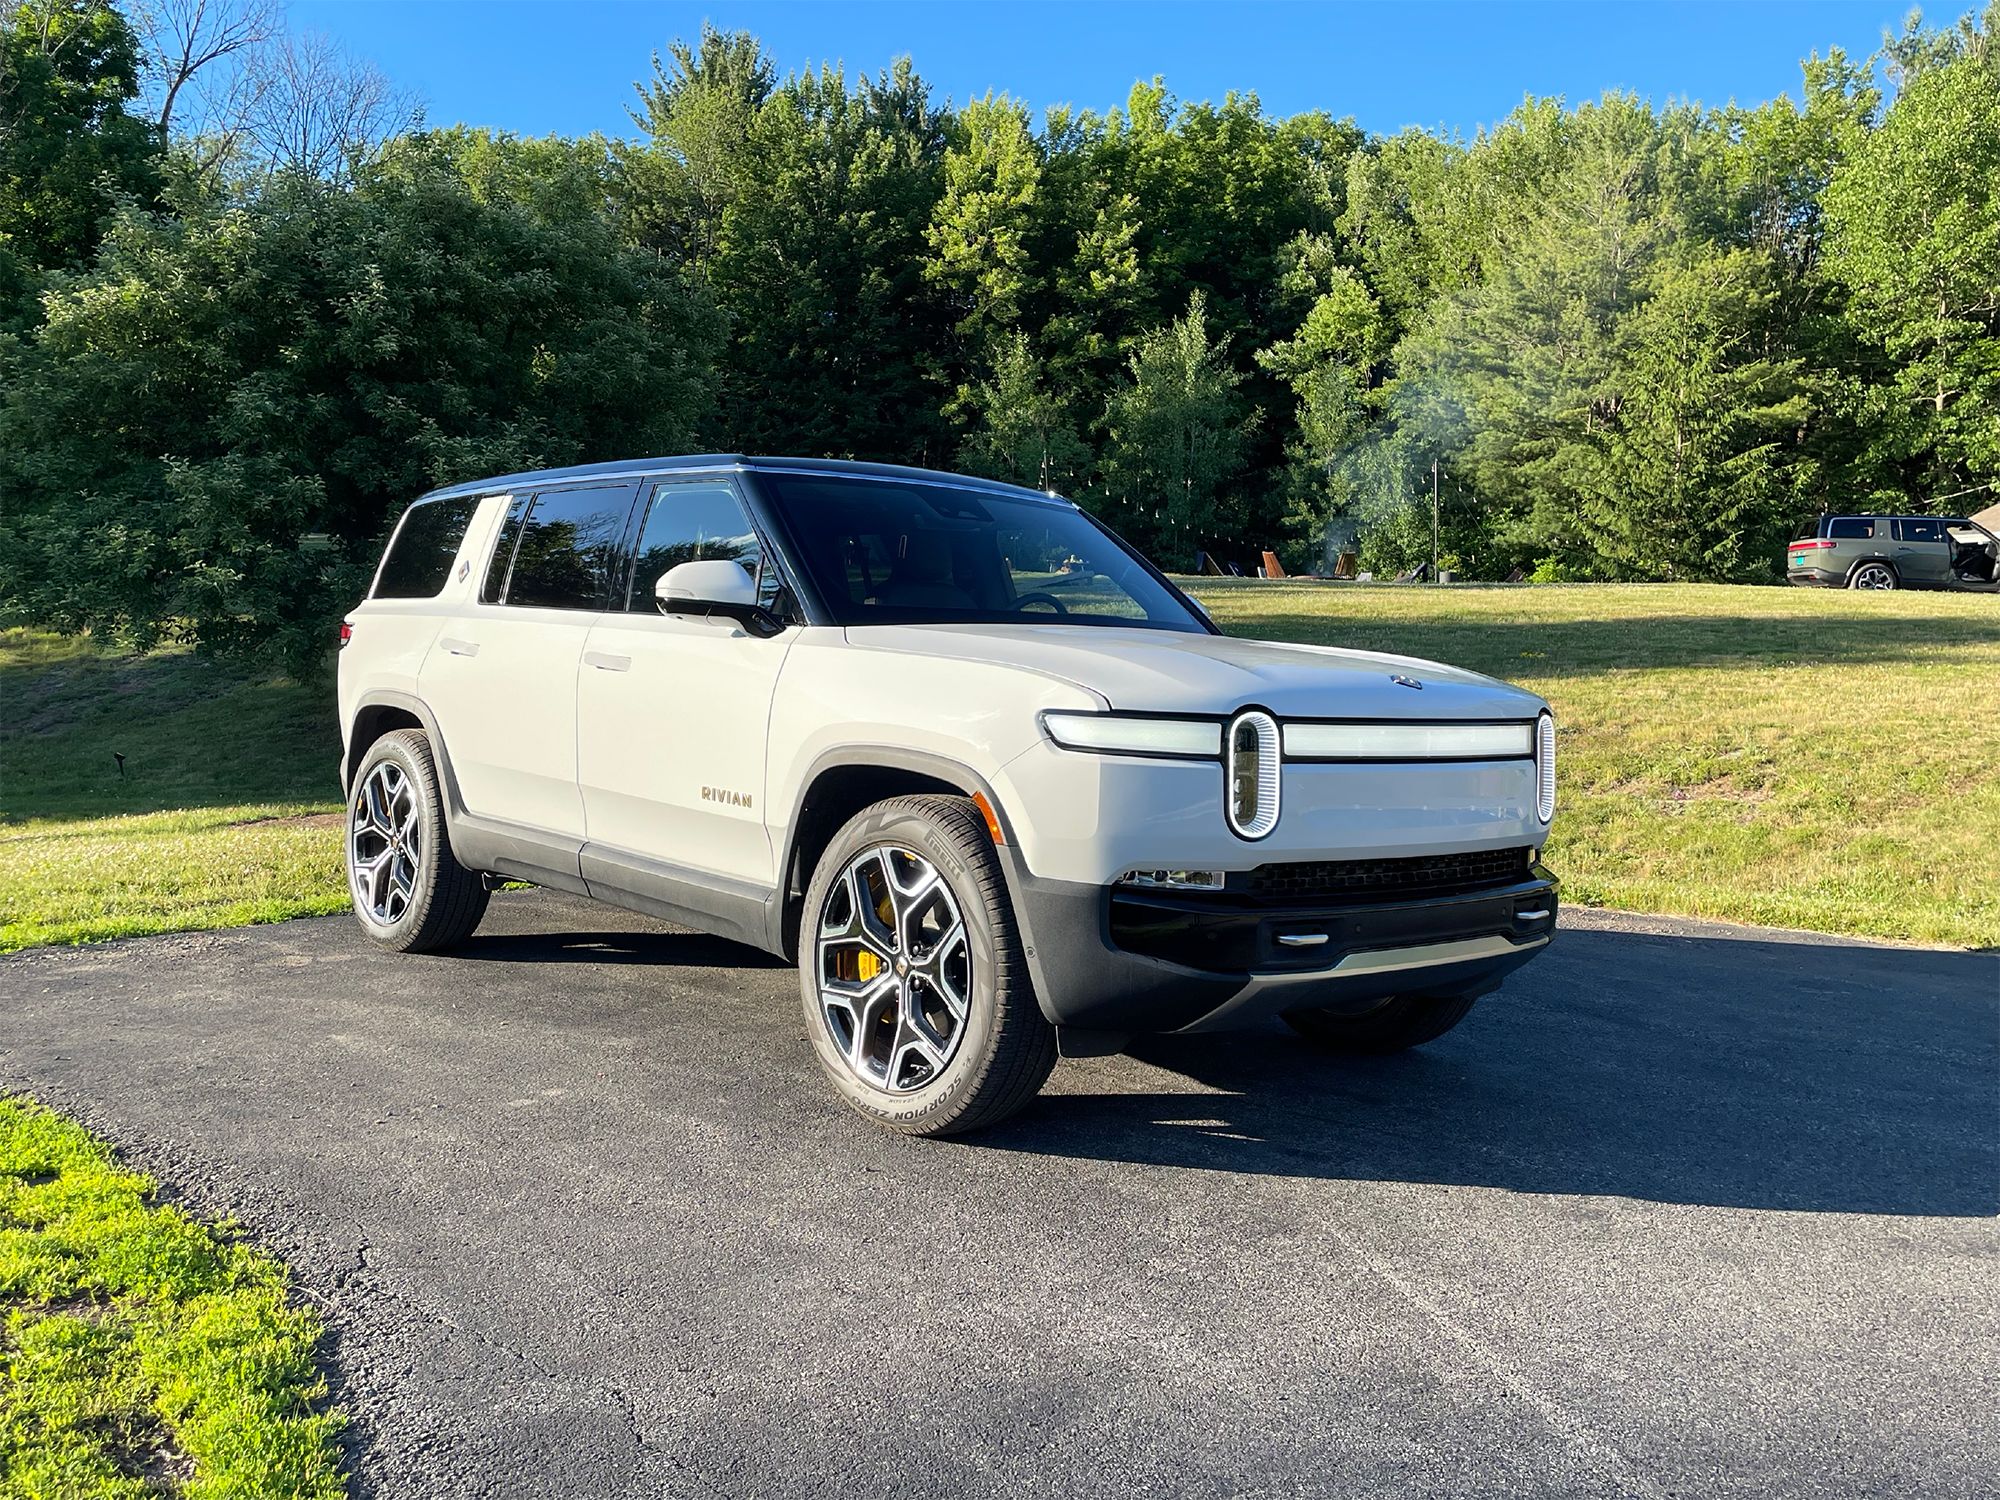 Rivian aims to reduce the carbon footprint of its next-generation electric vehicles.